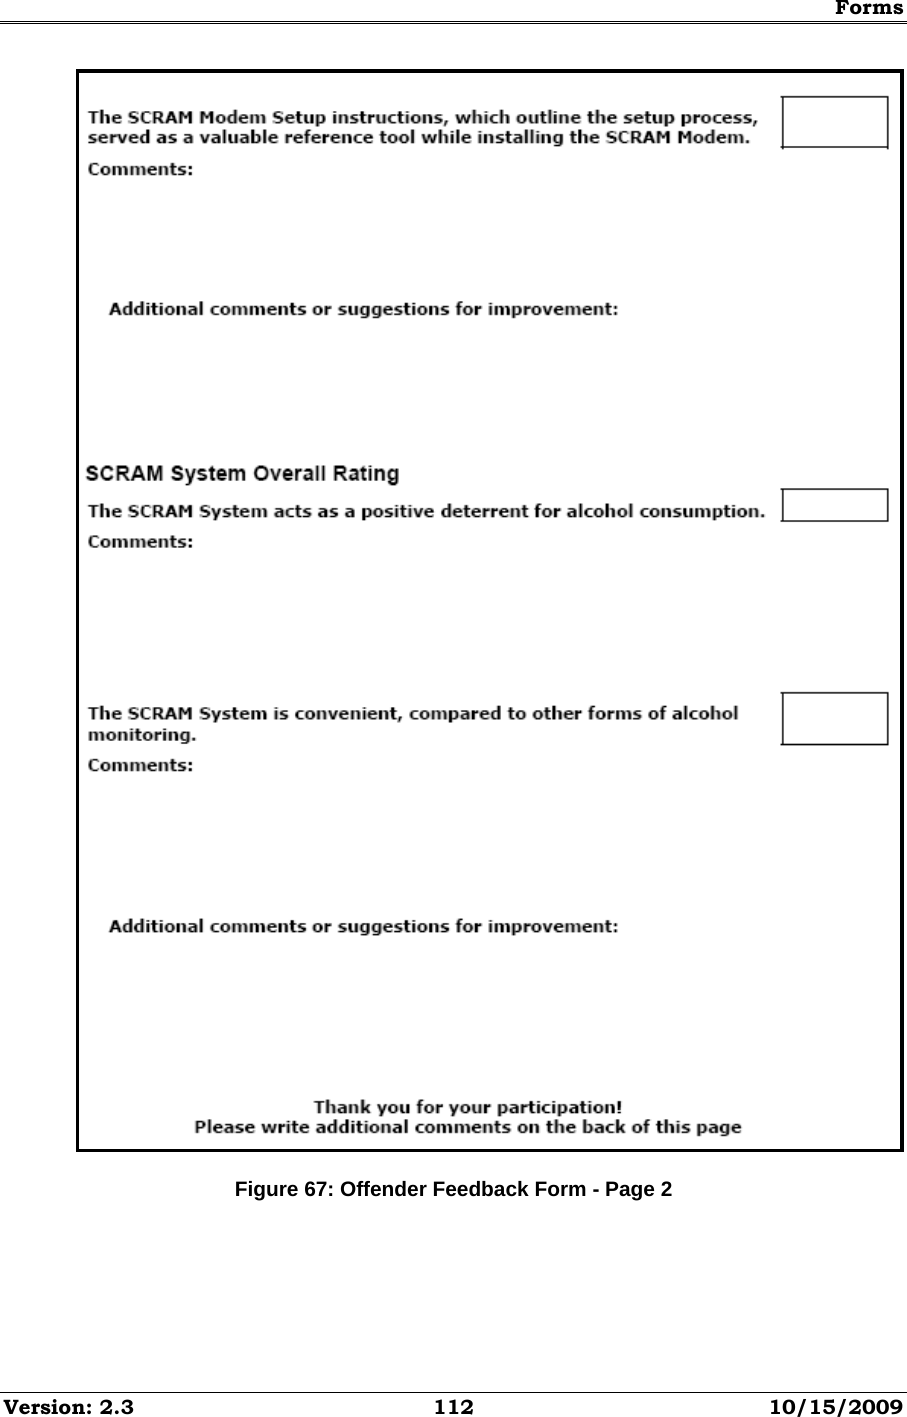 Forms Version: 2.3  112  10/15/2009  Figure 67: Offender Feedback Form - Page 2    